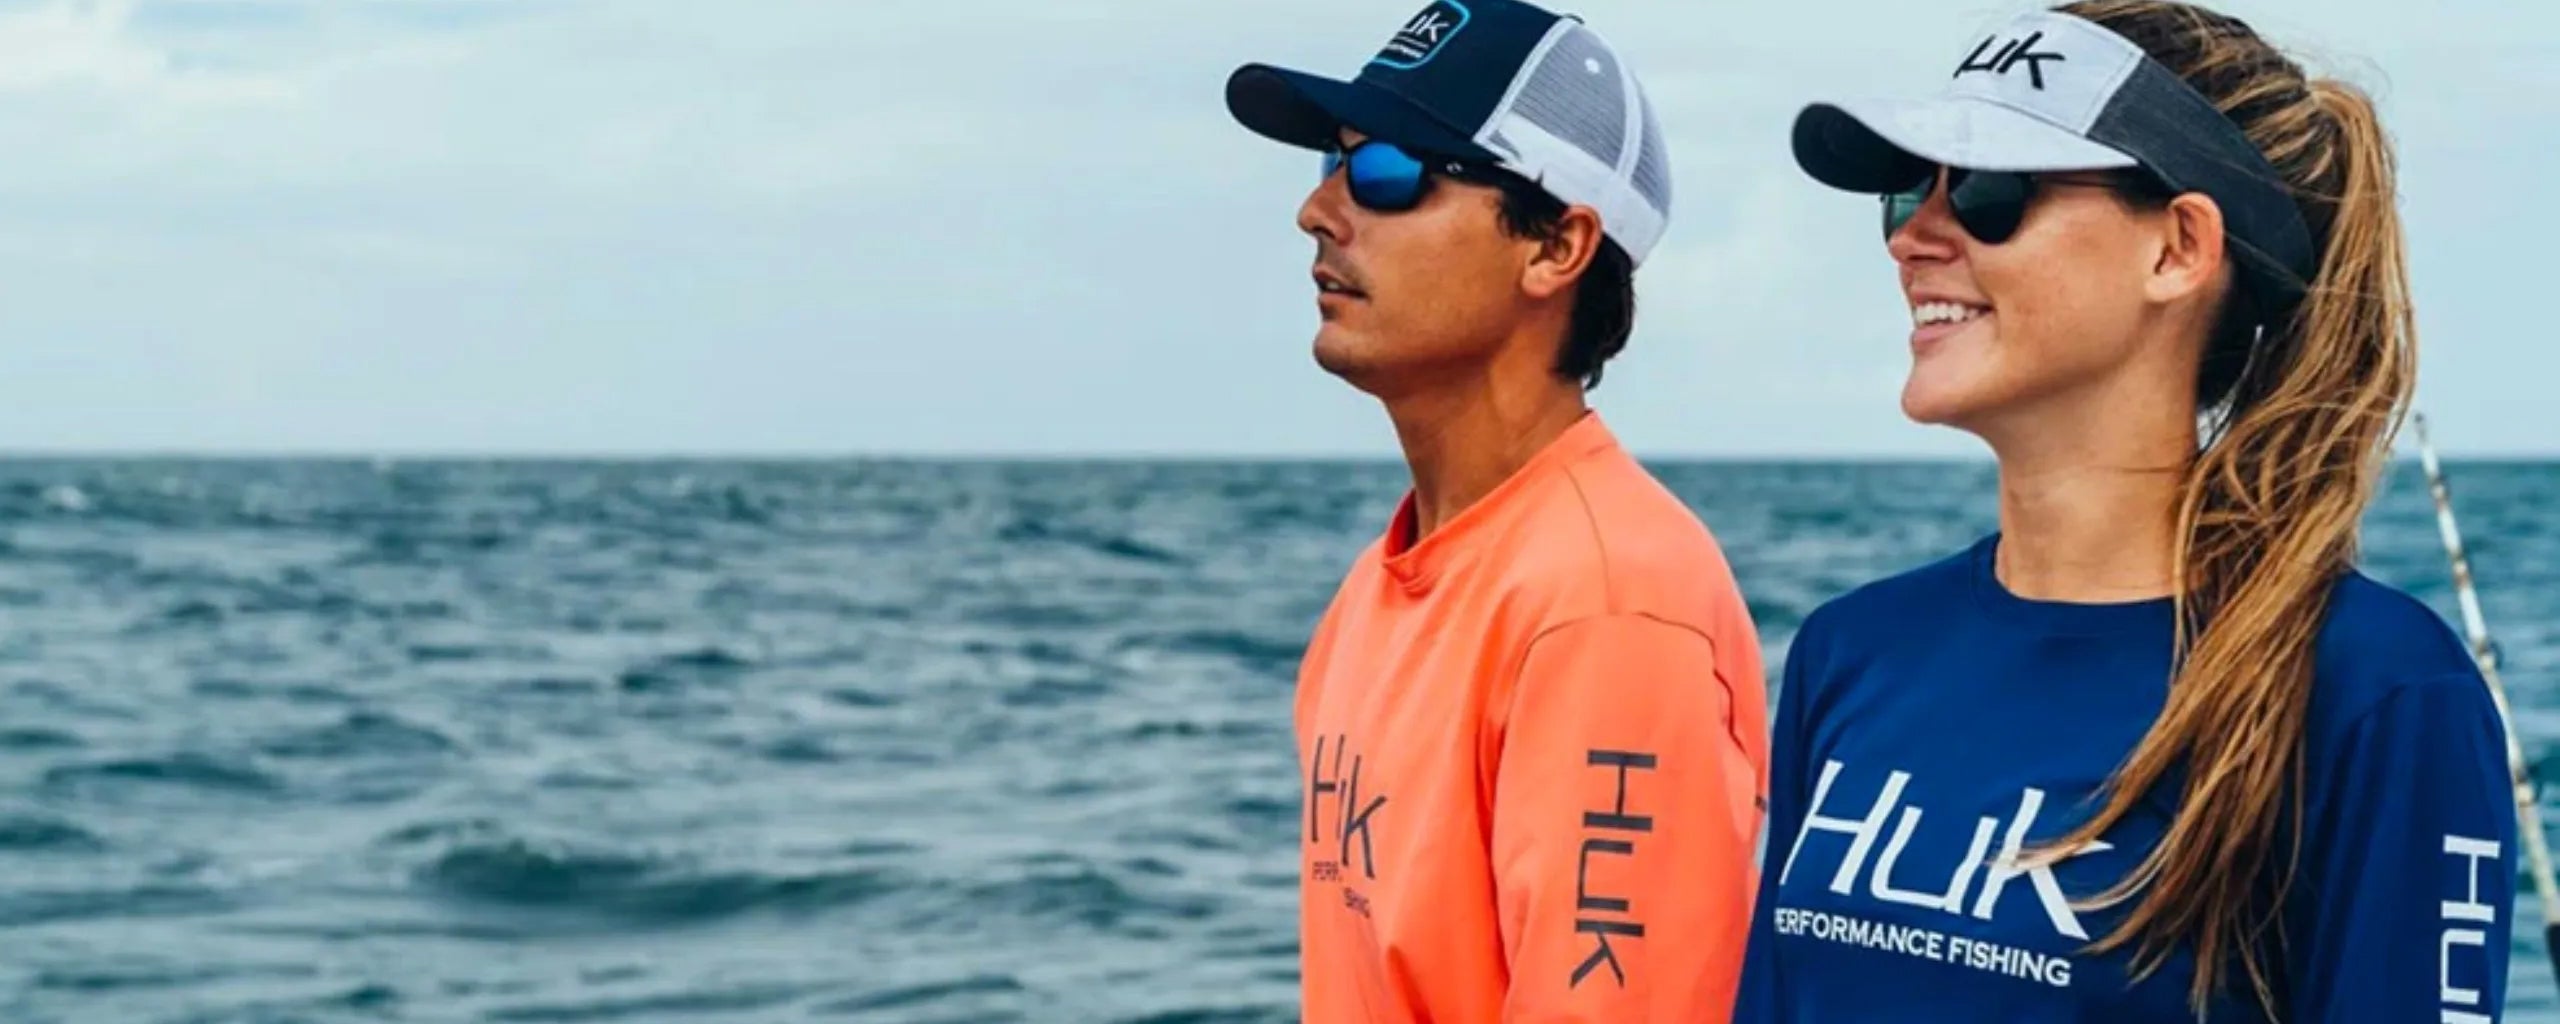 Dive into Adventure with HUK Performance Fishing Gear – Mountain